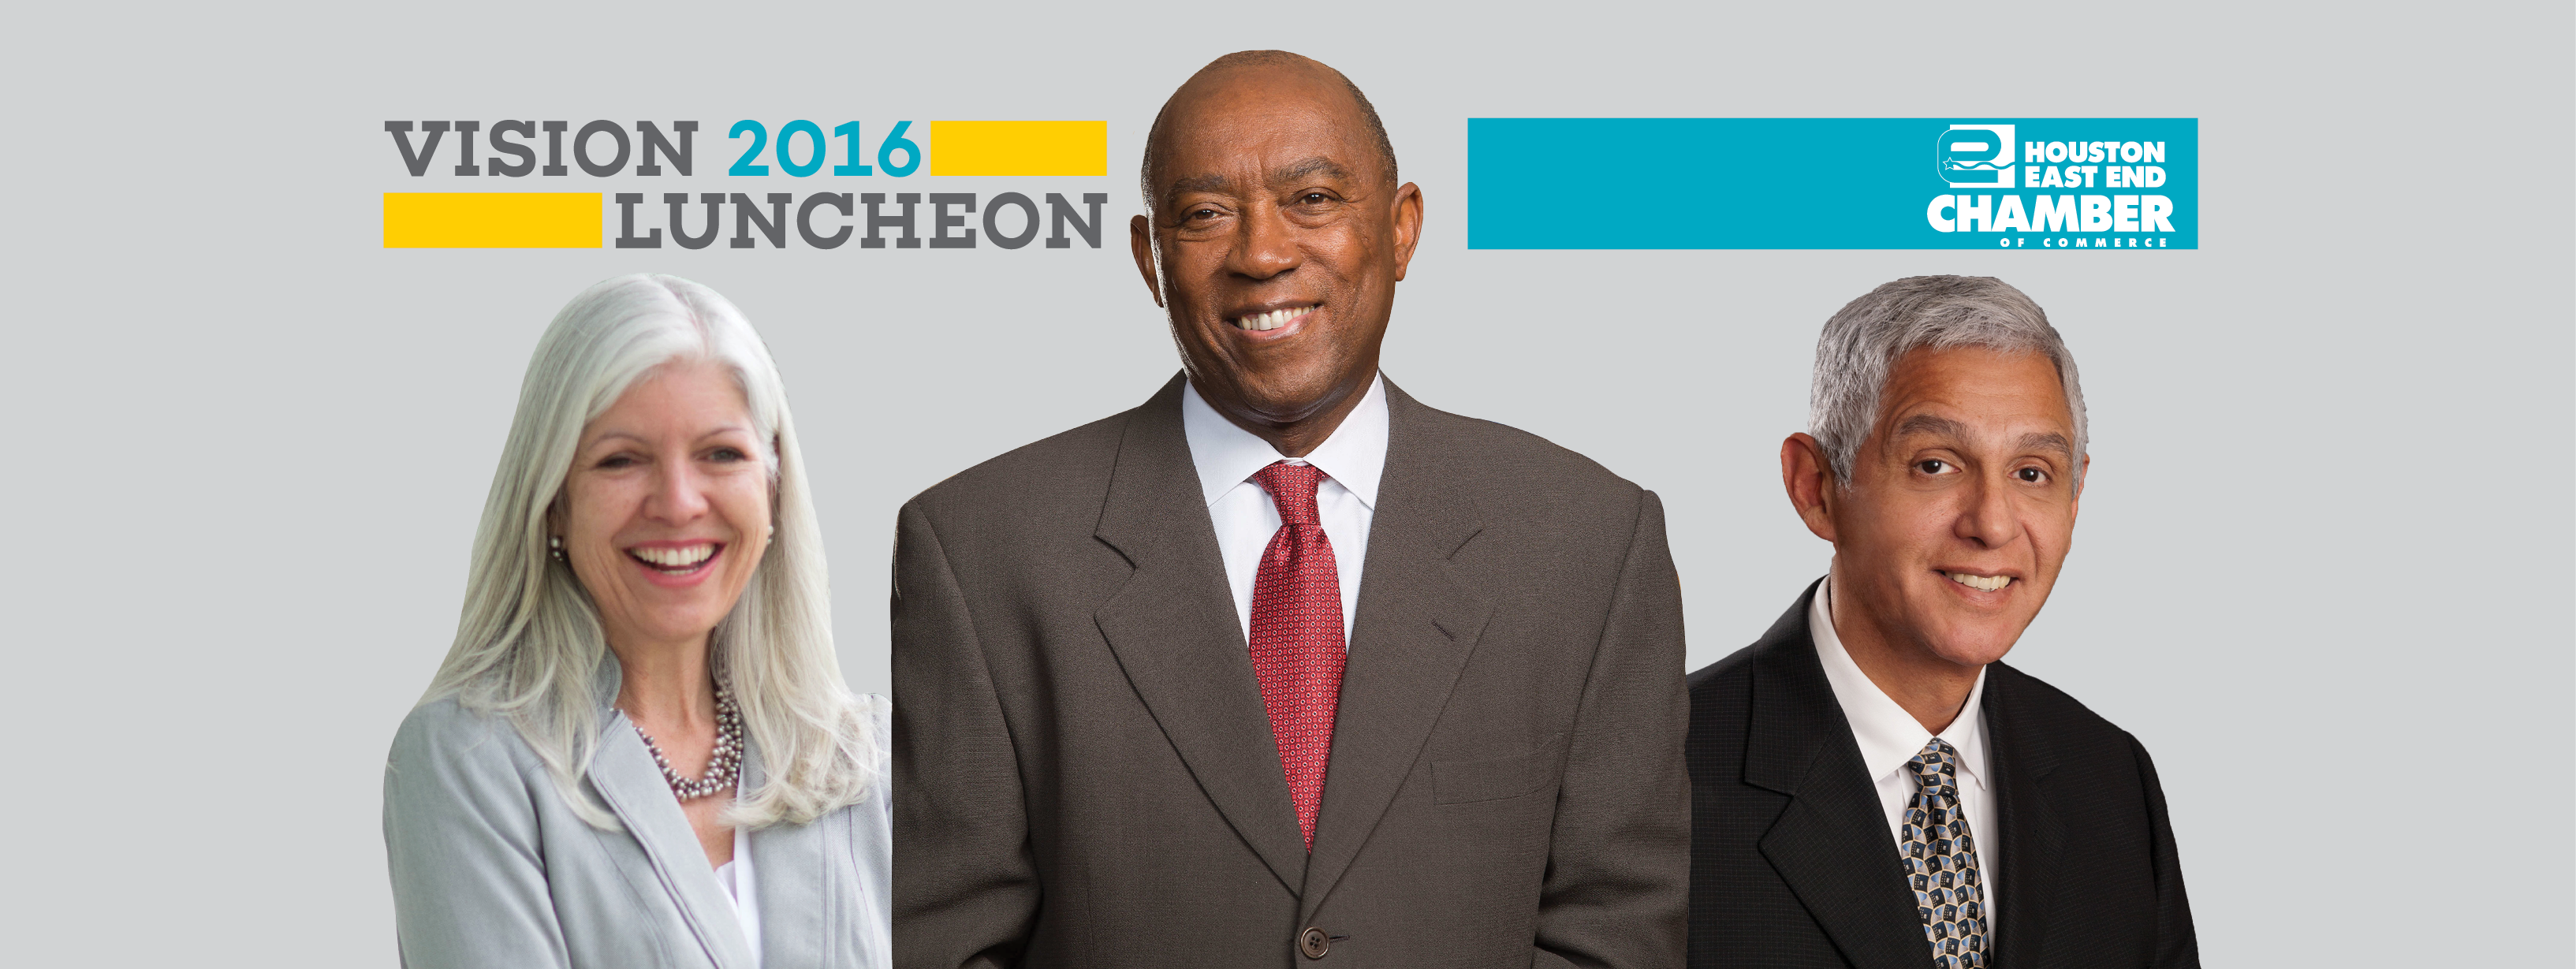 Join Mayor Turner at the East End Chamber's Vision 2016 Luncheon